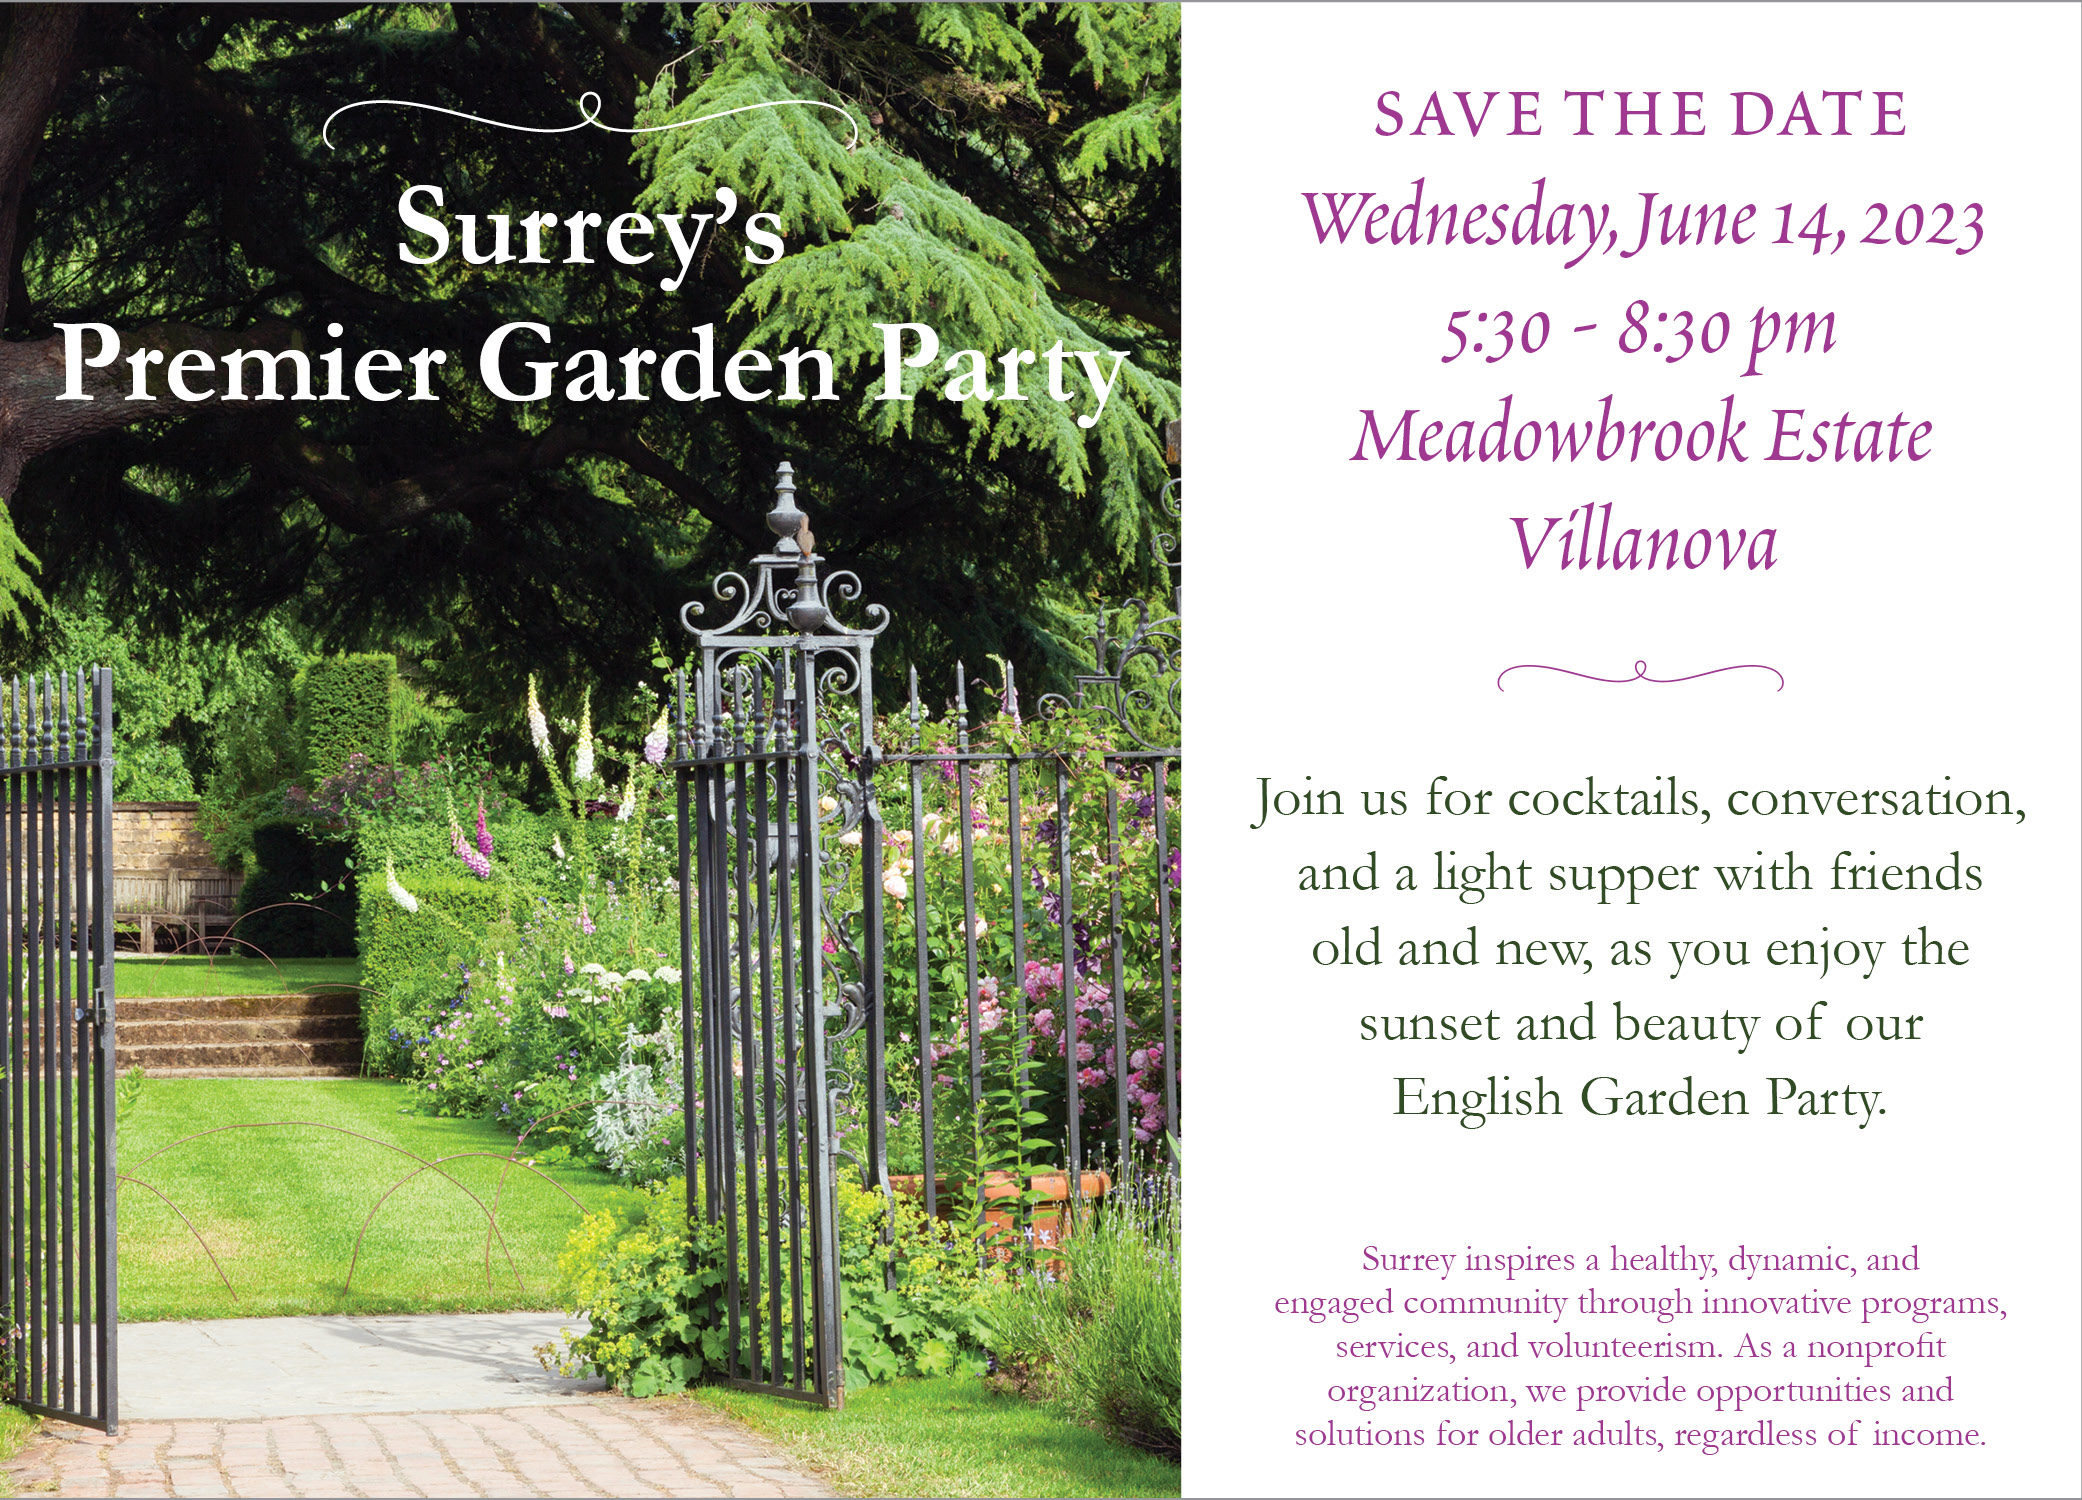 save the date from garden party